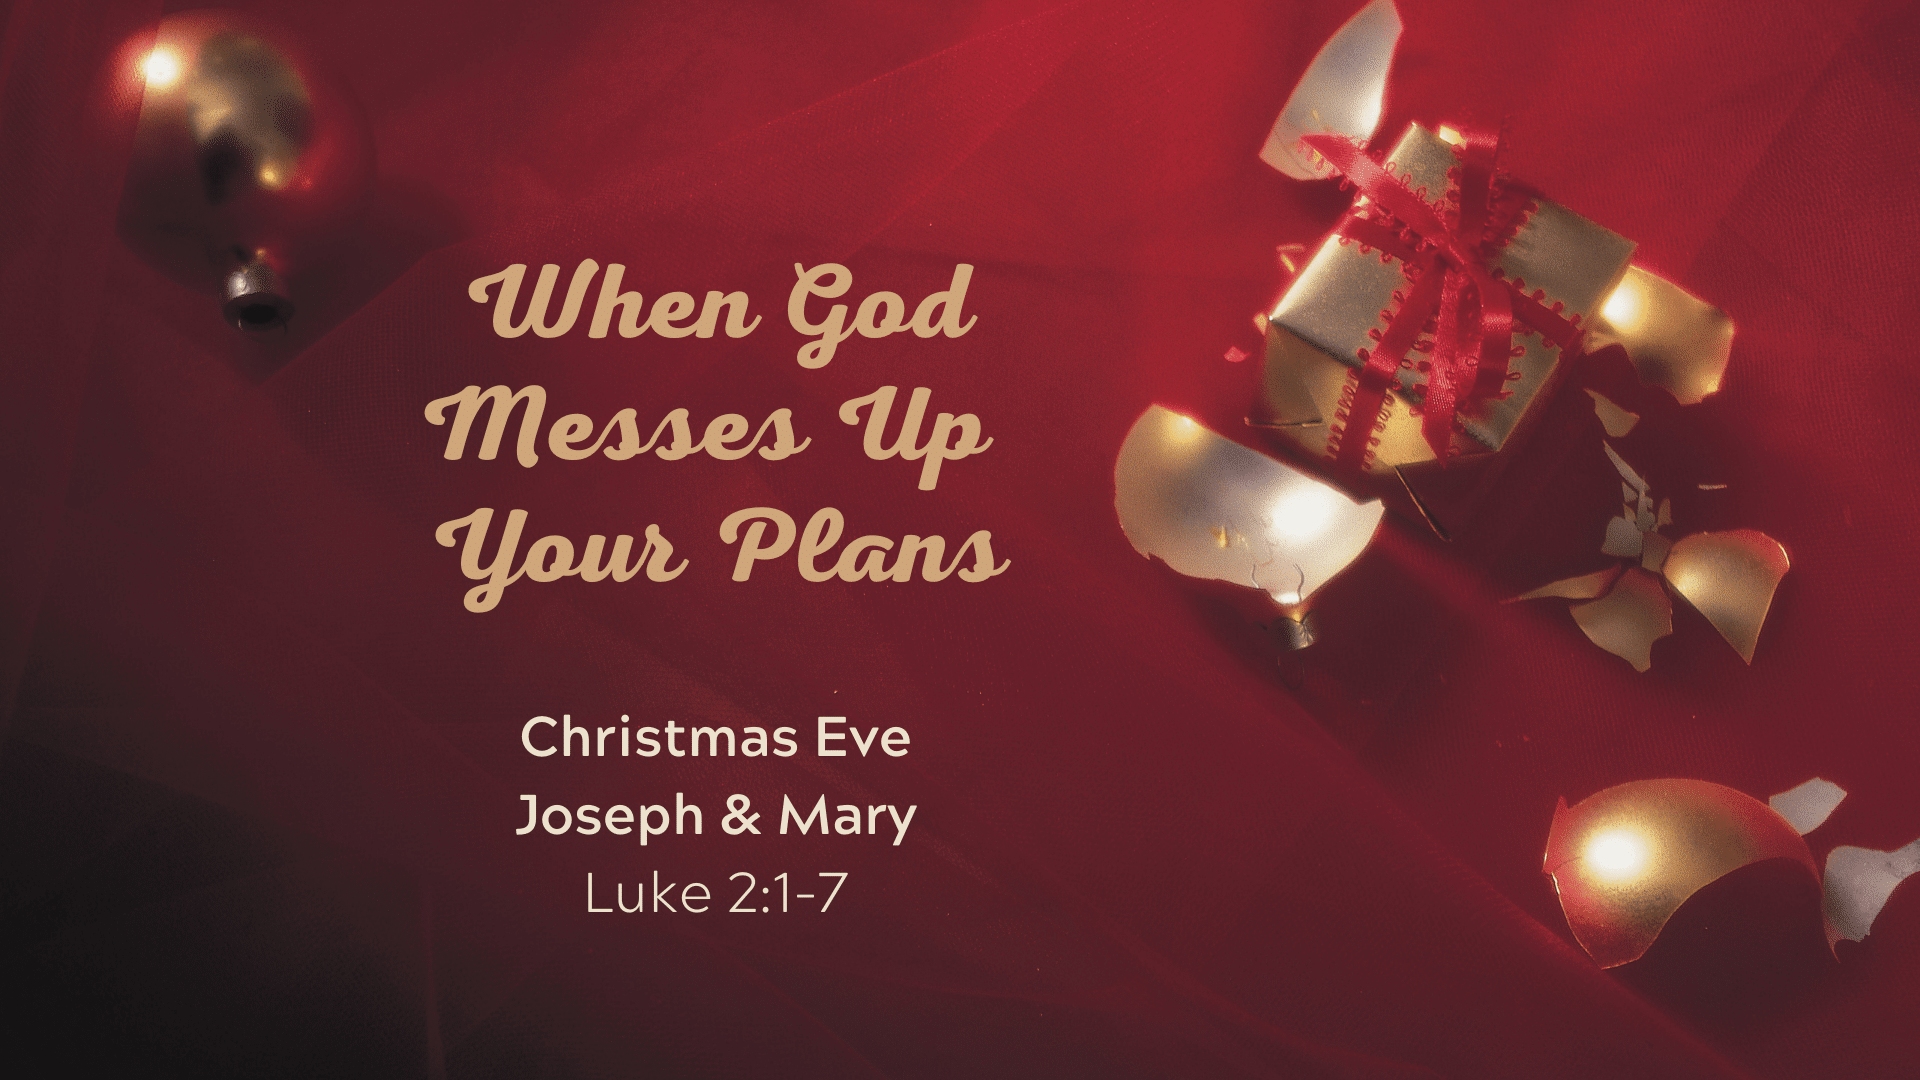 When God Messes Up Your Plans: Joseph & Mary